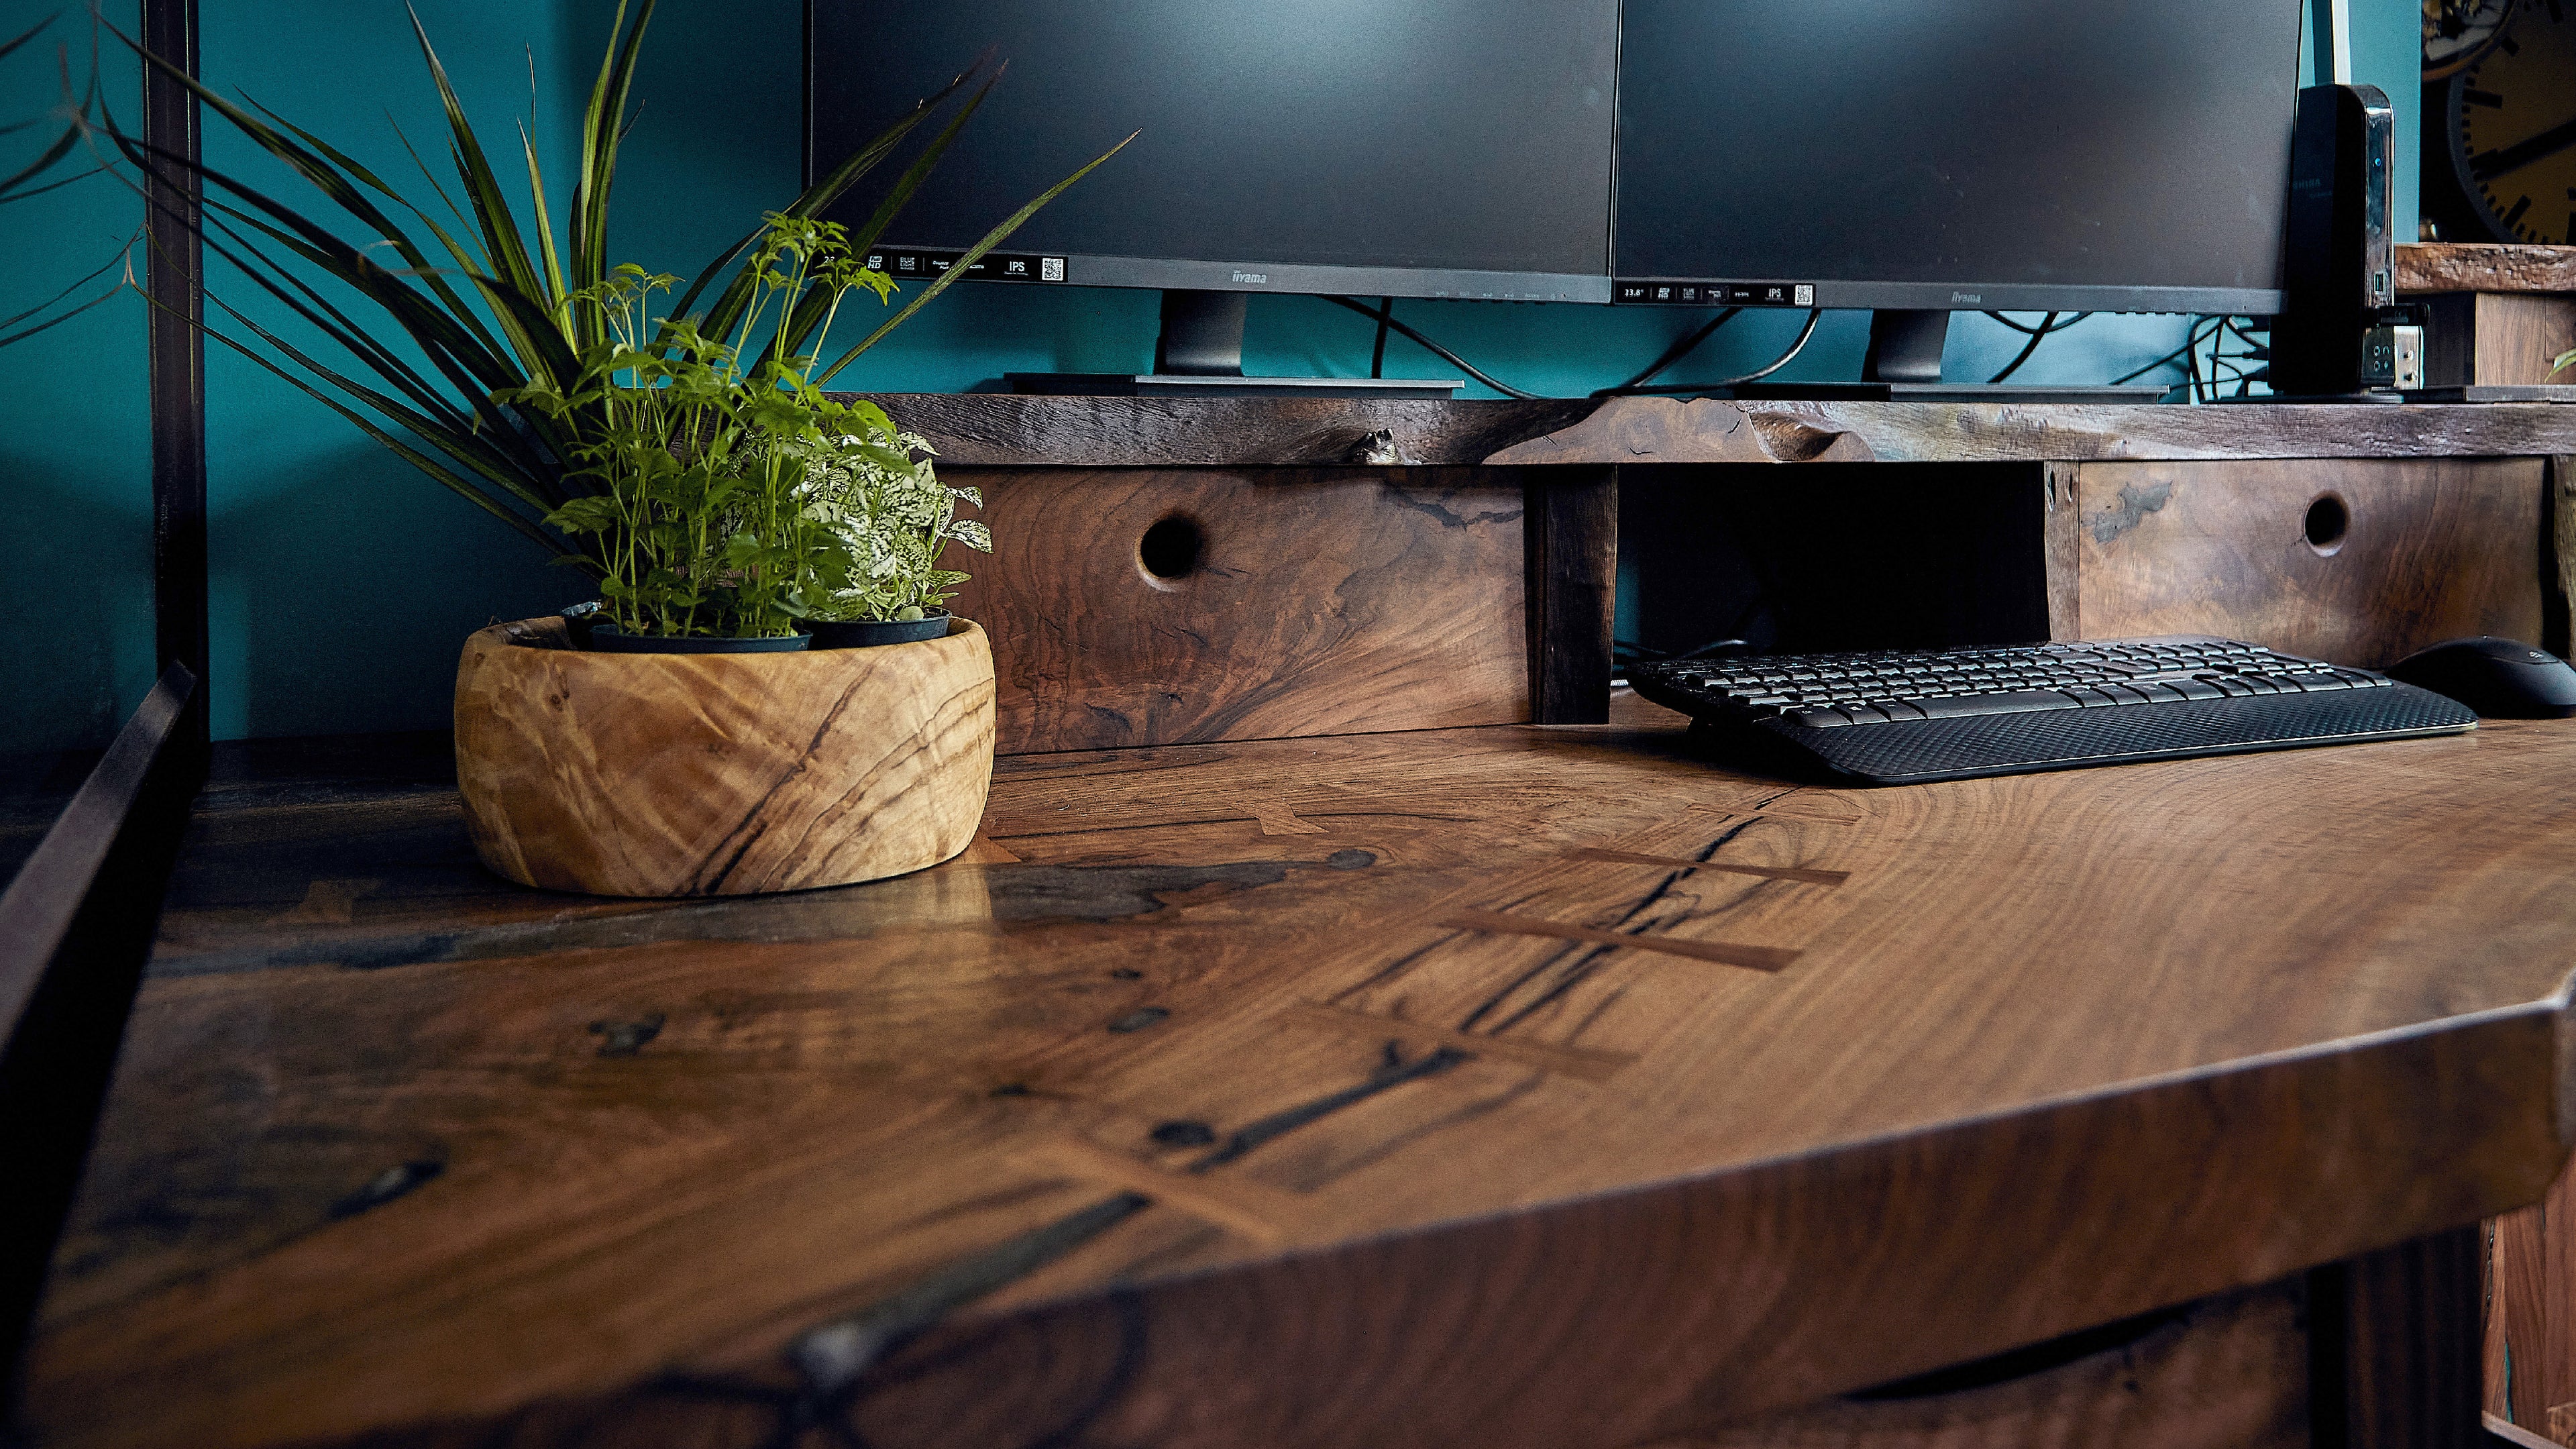 Artistic Live Edge Office Desks in Black Walnut Wood, other stock including Beech, Walnut, Ash are also available. Each bespoke piece crafted with care and precision to bring natur einto your home.